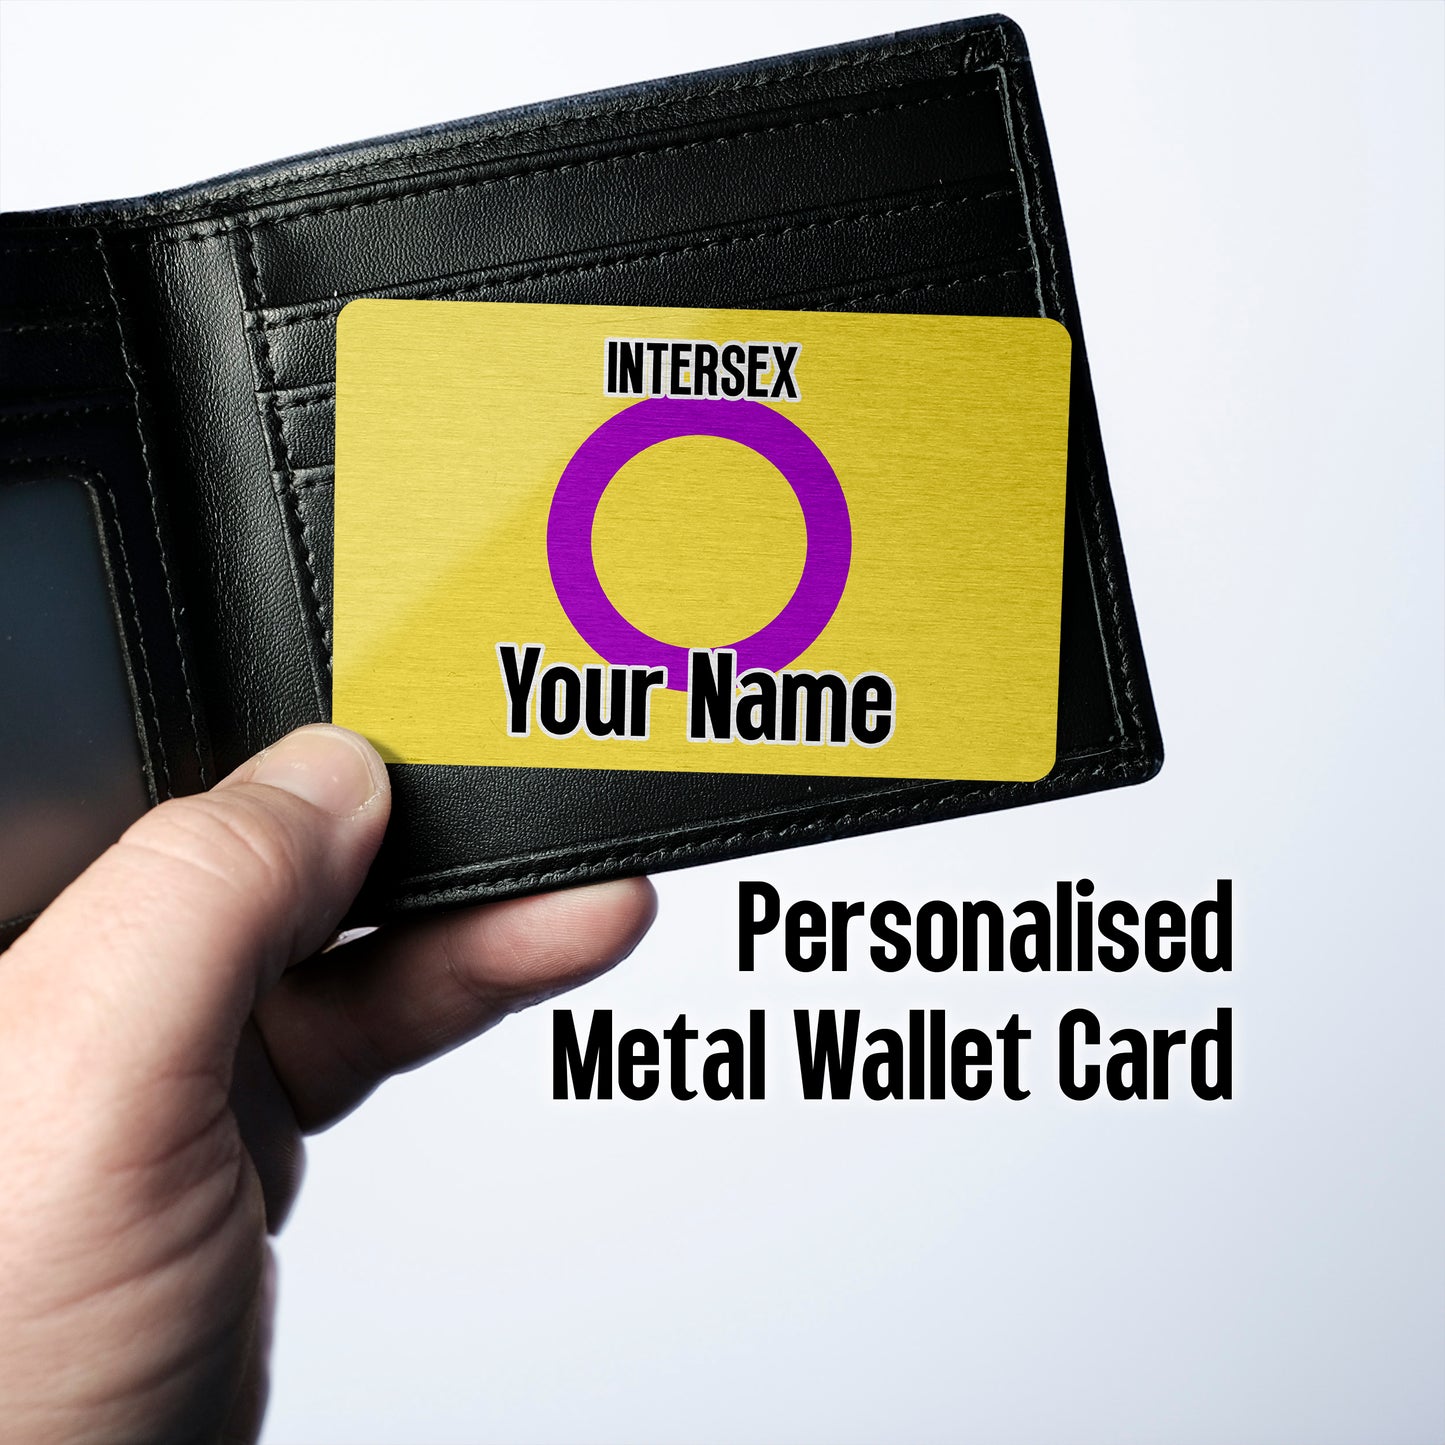 Aluminium wallet card personalised with your name and the intersex pride flag